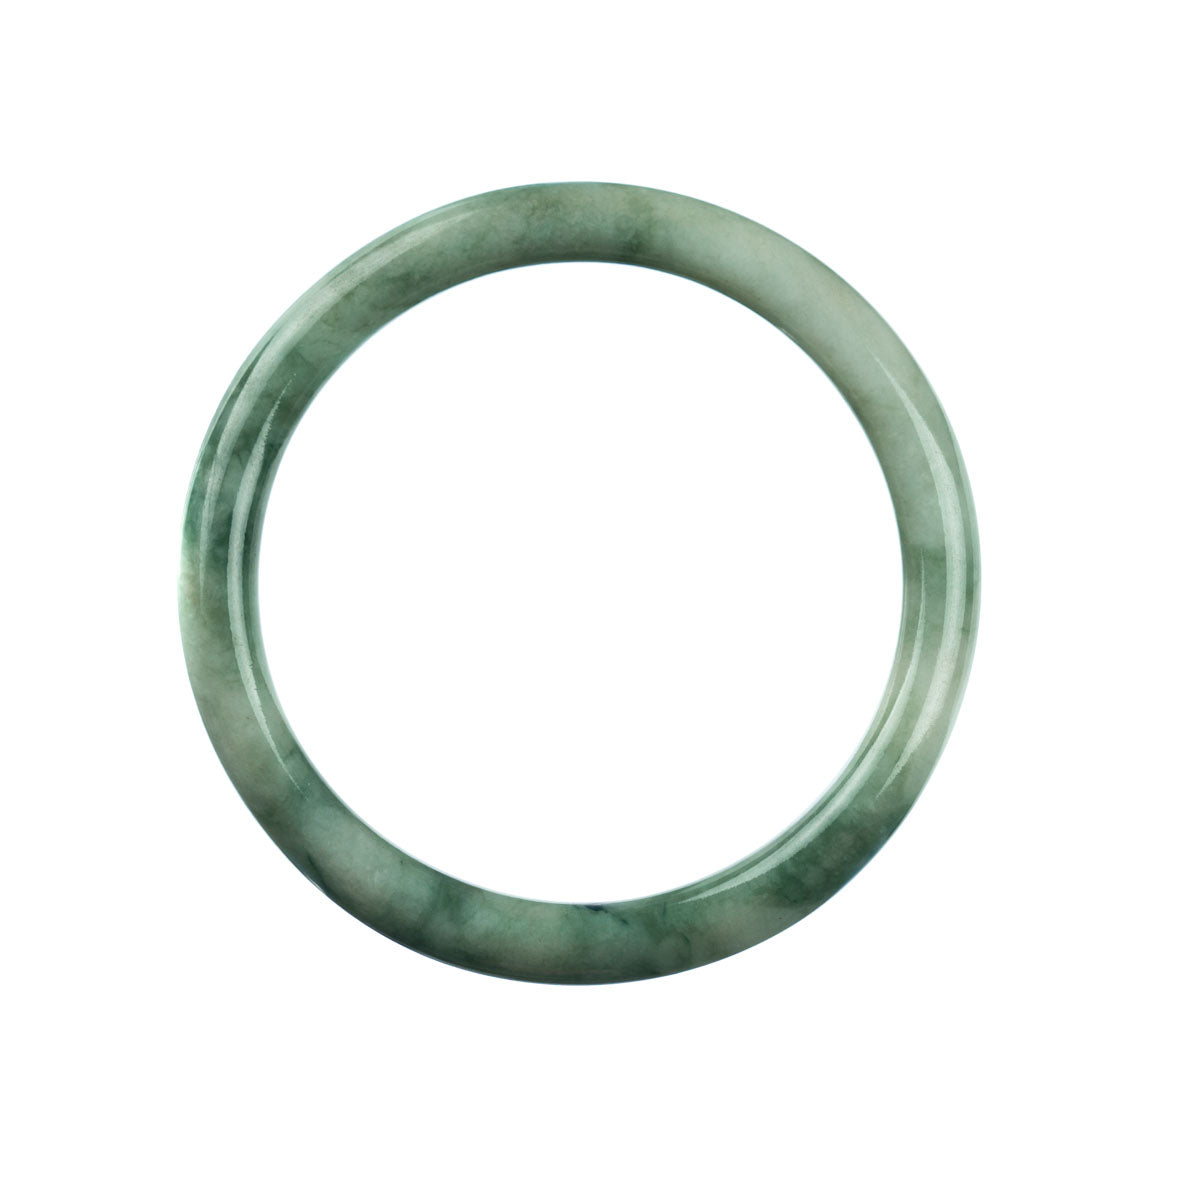 A round, genuine Grade A Green Jade bangle bracelet, measuring 61mm in diameter, available from MAYS GEMS.